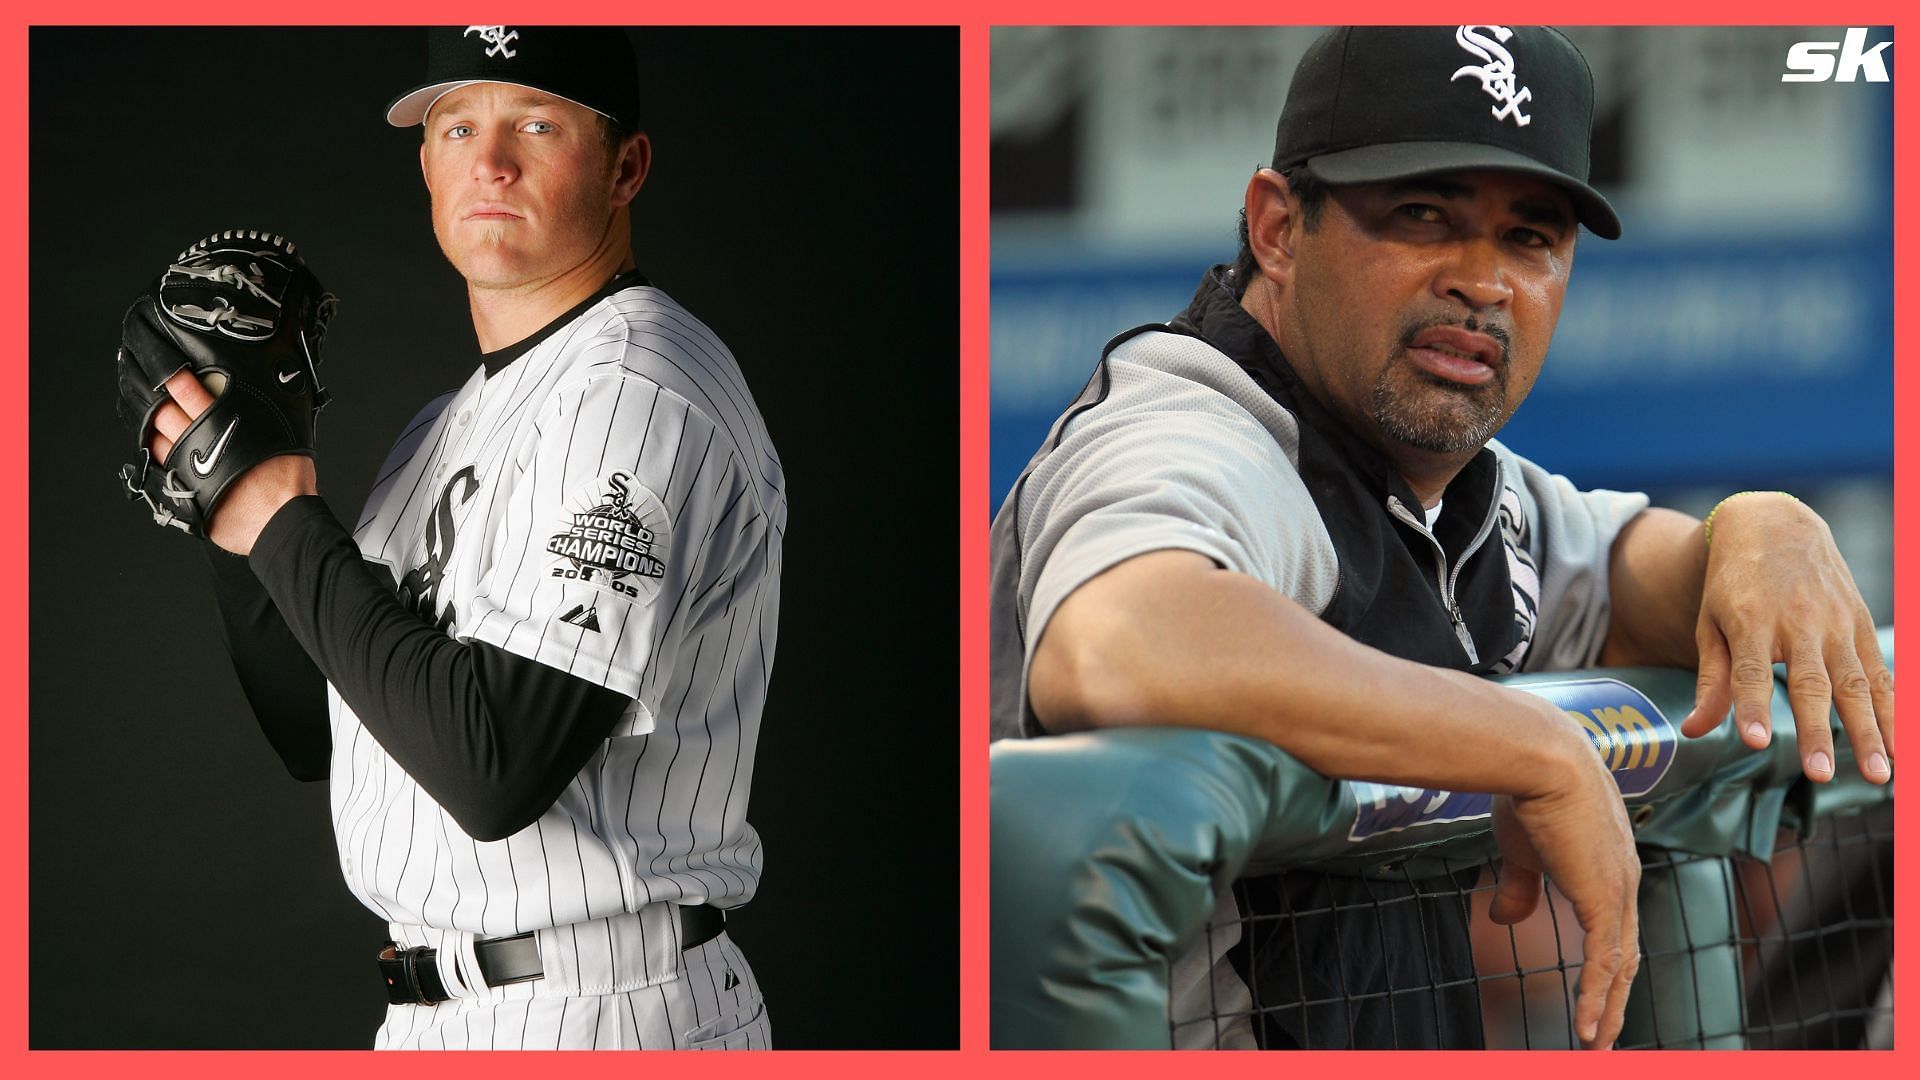 Former Chicago White Sox pitcher Sean Tracey and former White Sox manager Ozzie Guillen